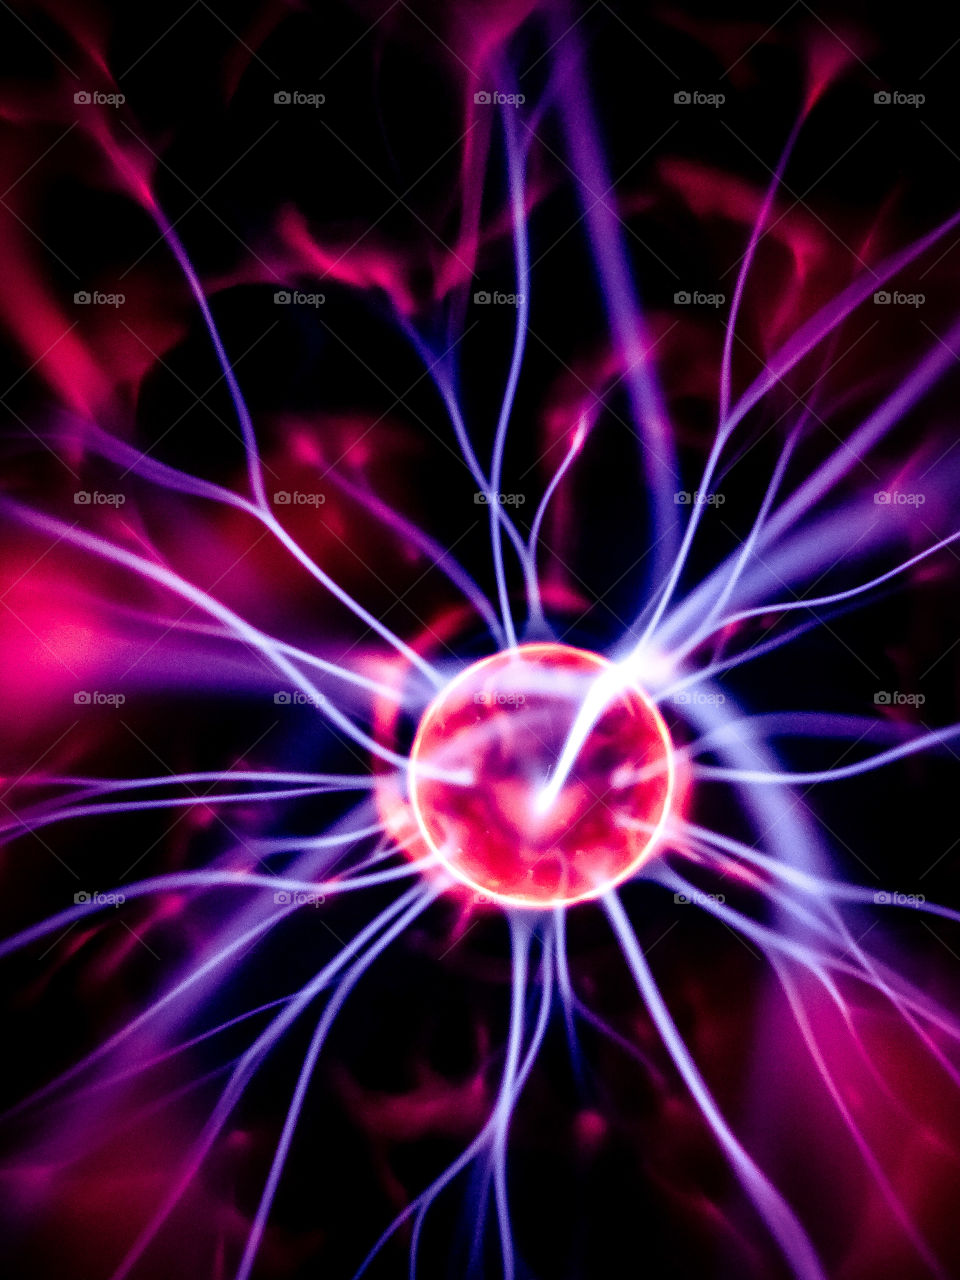 Static Electricity from a plasma ball